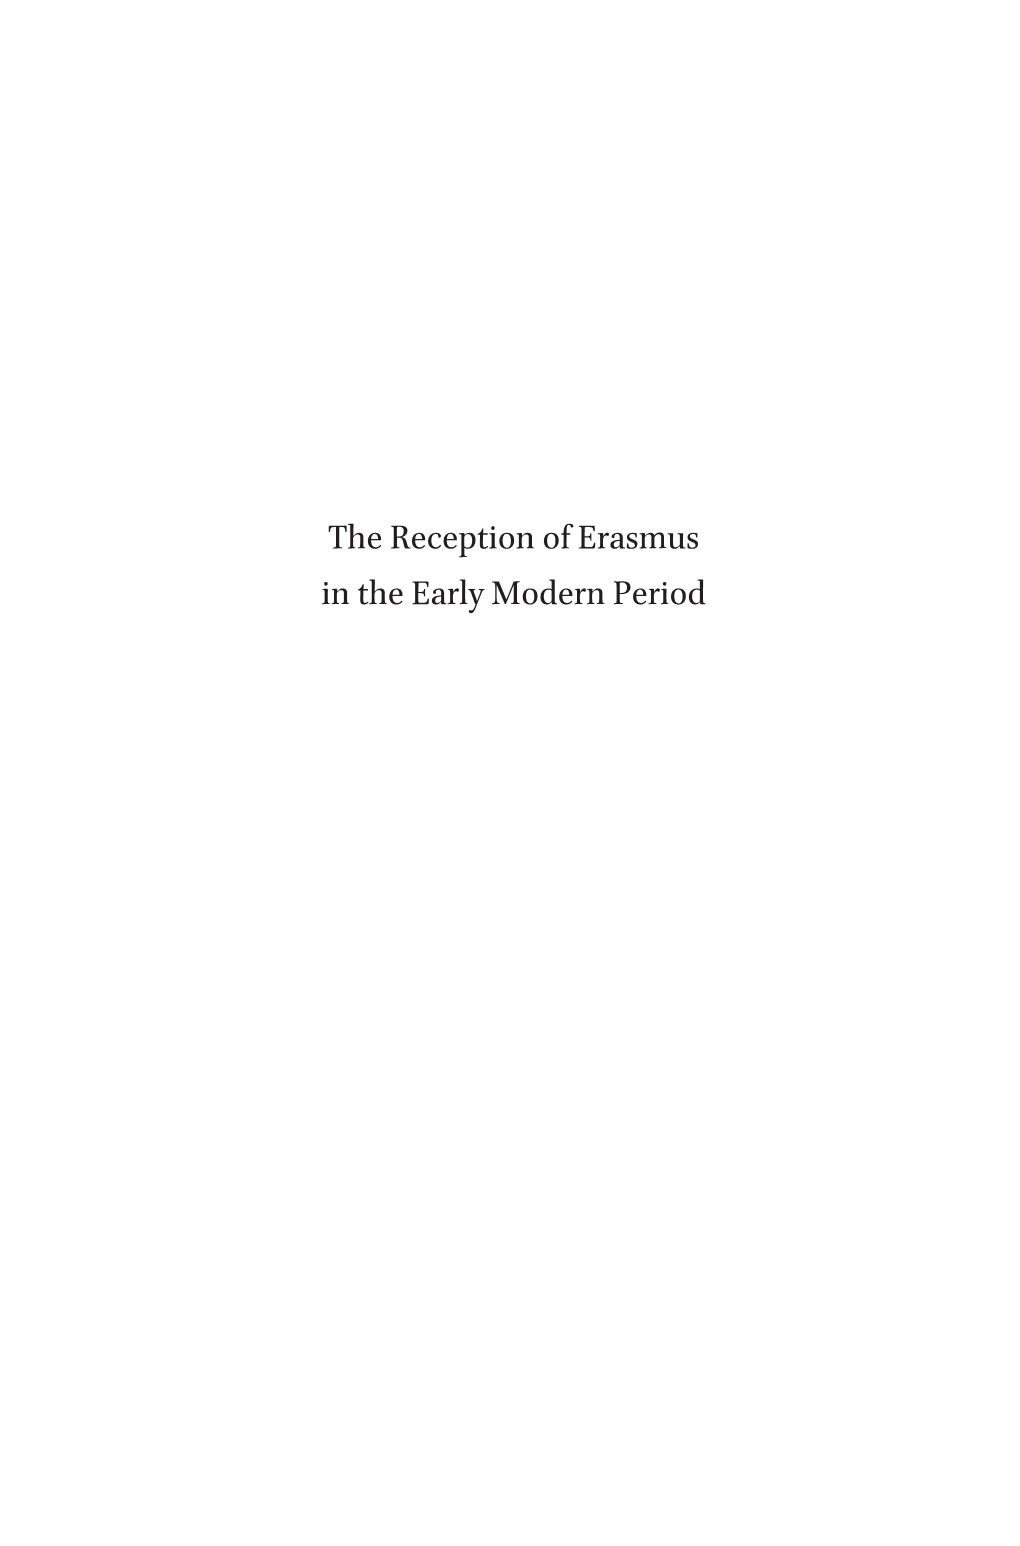 The Reception of Erasmus in the Early Modern Period Intersections Interdisciplinary Studies in Early Modern Culture